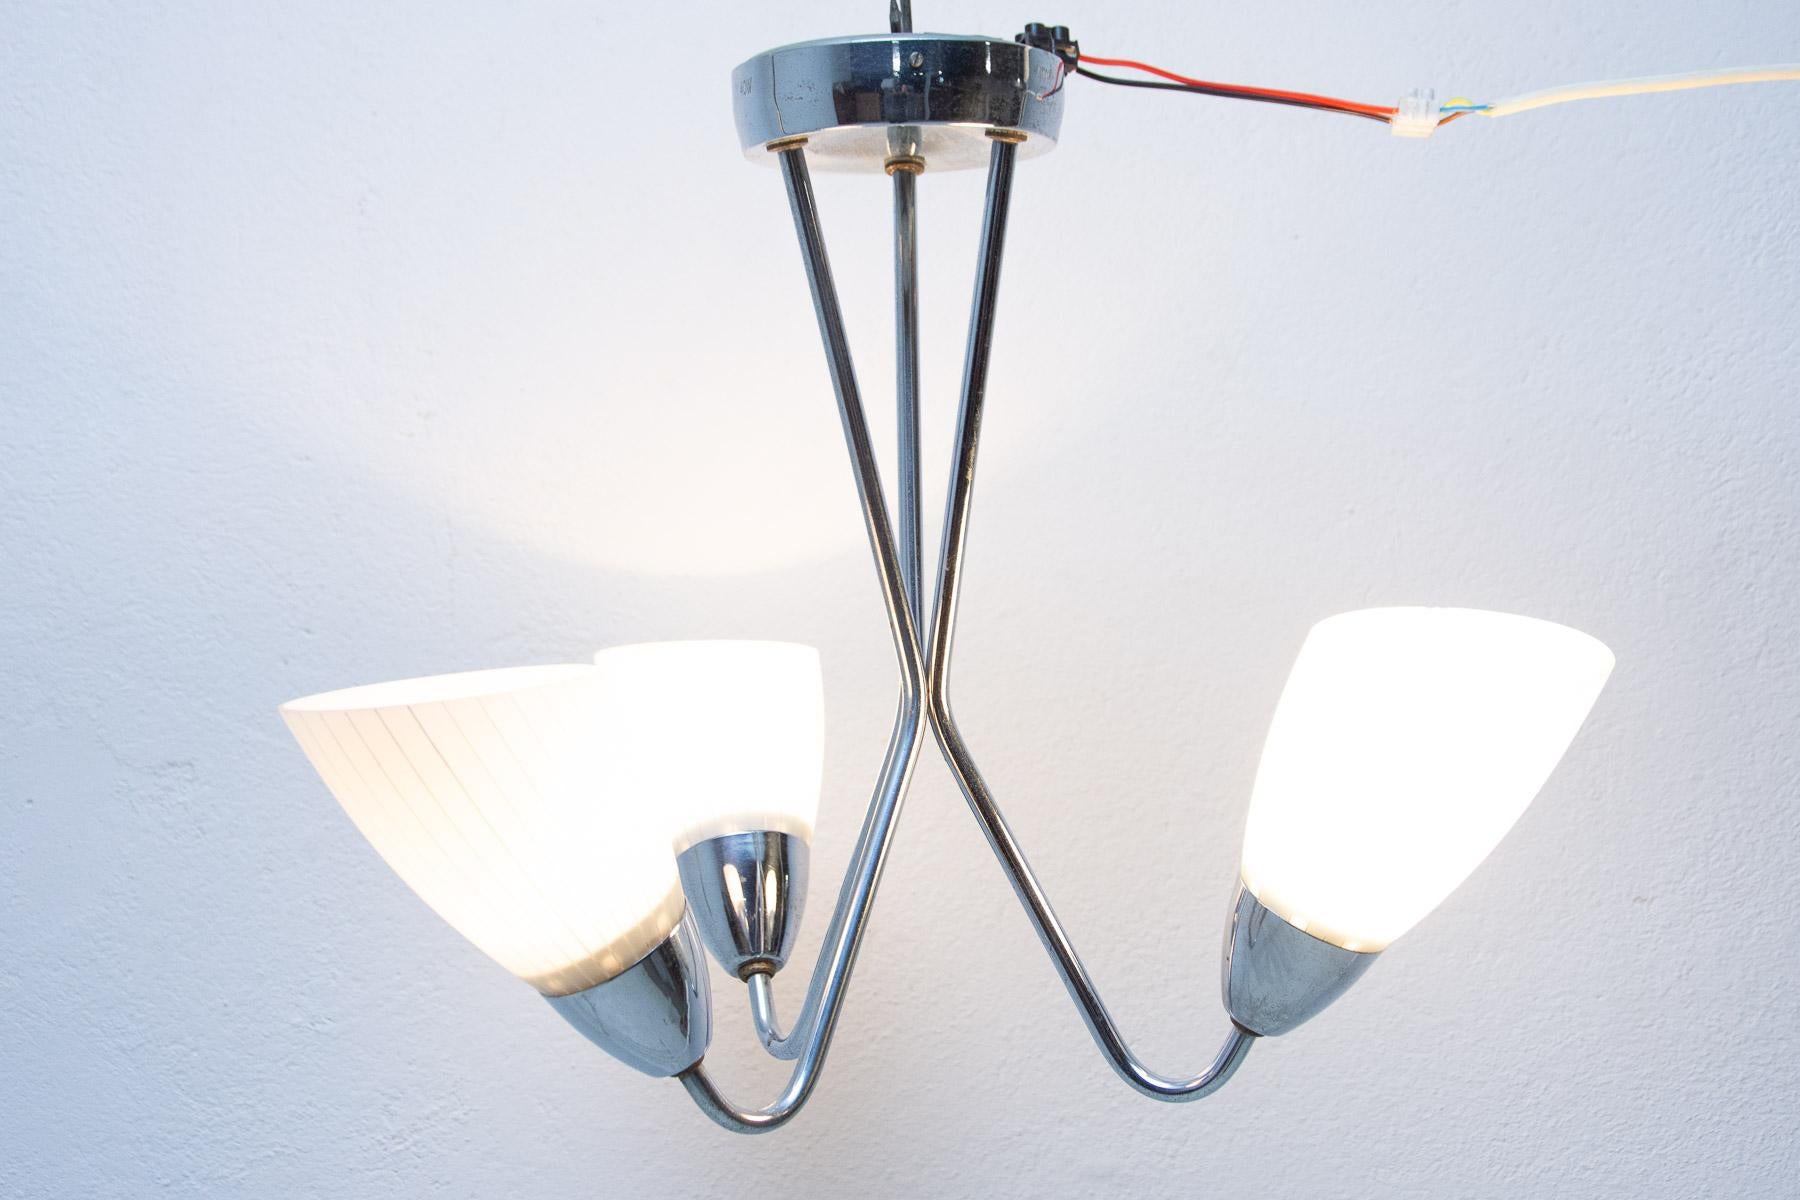 Czechoslovak milky glass and chrome pendant lamp in the shape of flower, made in the former Czechoslovakia in the 1960´s. It features 2 chrome arms with lampshades made of milky glass. In very good condition, new wiring.

Measures: Total height: